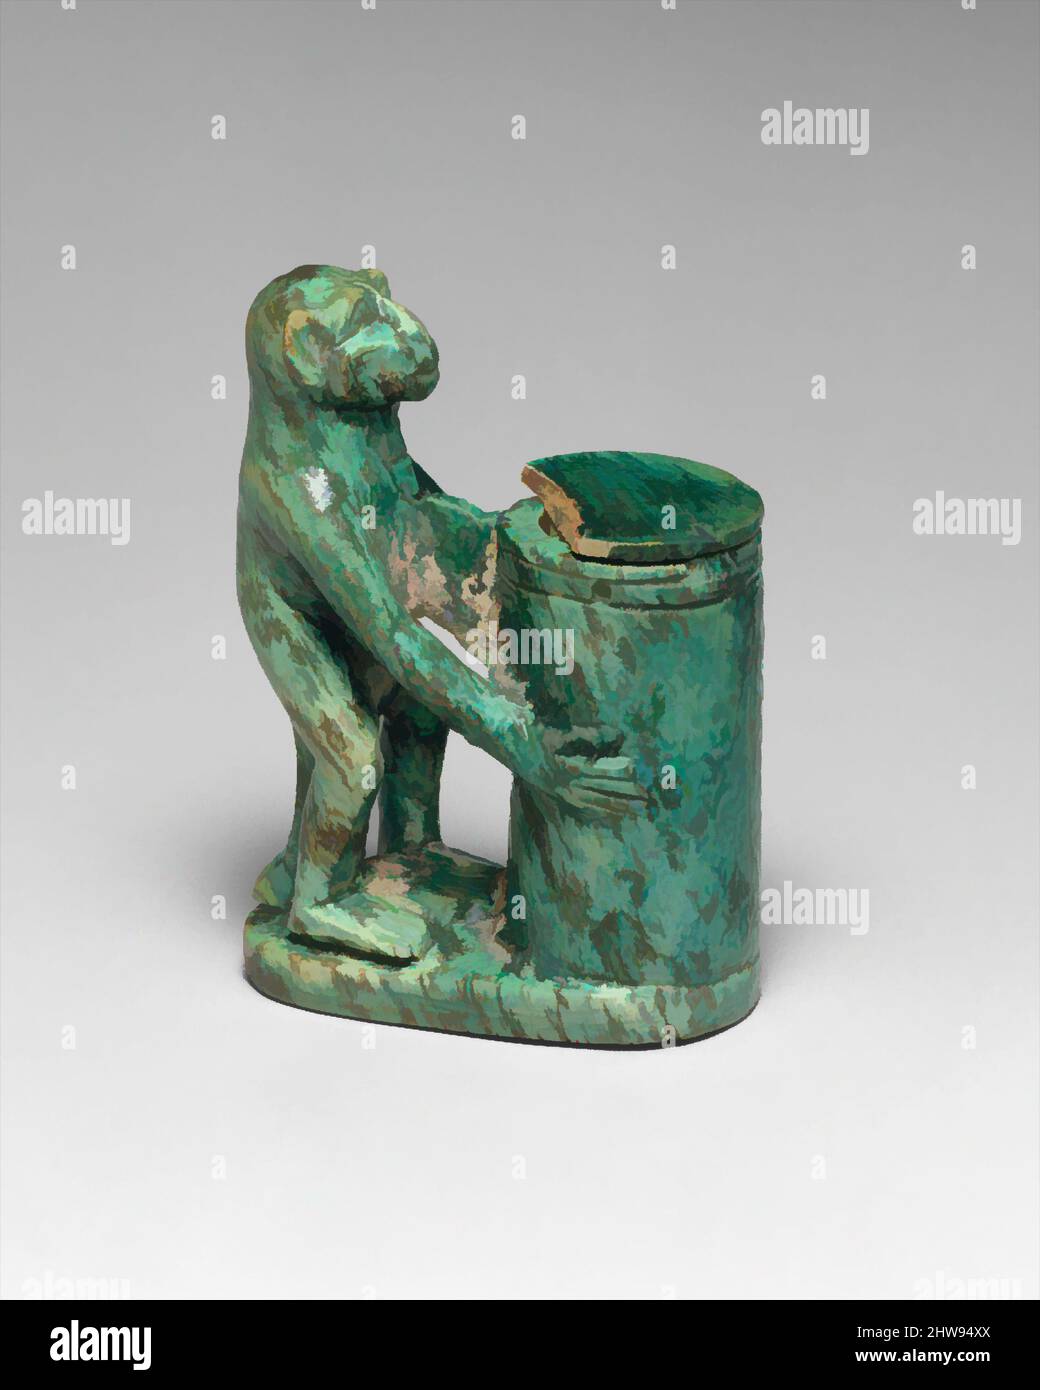 Art inspired by Kohl Tube in the Shape of a Monkey Holding a Vessel, New Kingdom, Dynasty 18, early, ca. 1550–1450 B.C., From Egypt, Steatite (glazed), h. 6 cm (2 3/8 in); w. 4.1 cm (1 5/8 in), The Egyptians' use of eye cosmetics to enhance beauty and for prophylactic purposes is well, Classic works modernized by Artotop with a splash of modernity. Shapes, color and value, eye-catching visual impact on art. Emotions through freedom of artworks in a contemporary way. A timeless message pursuing a wildly creative new direction. Artists turning to the digital medium and creating the Artotop NFT Stock Photo